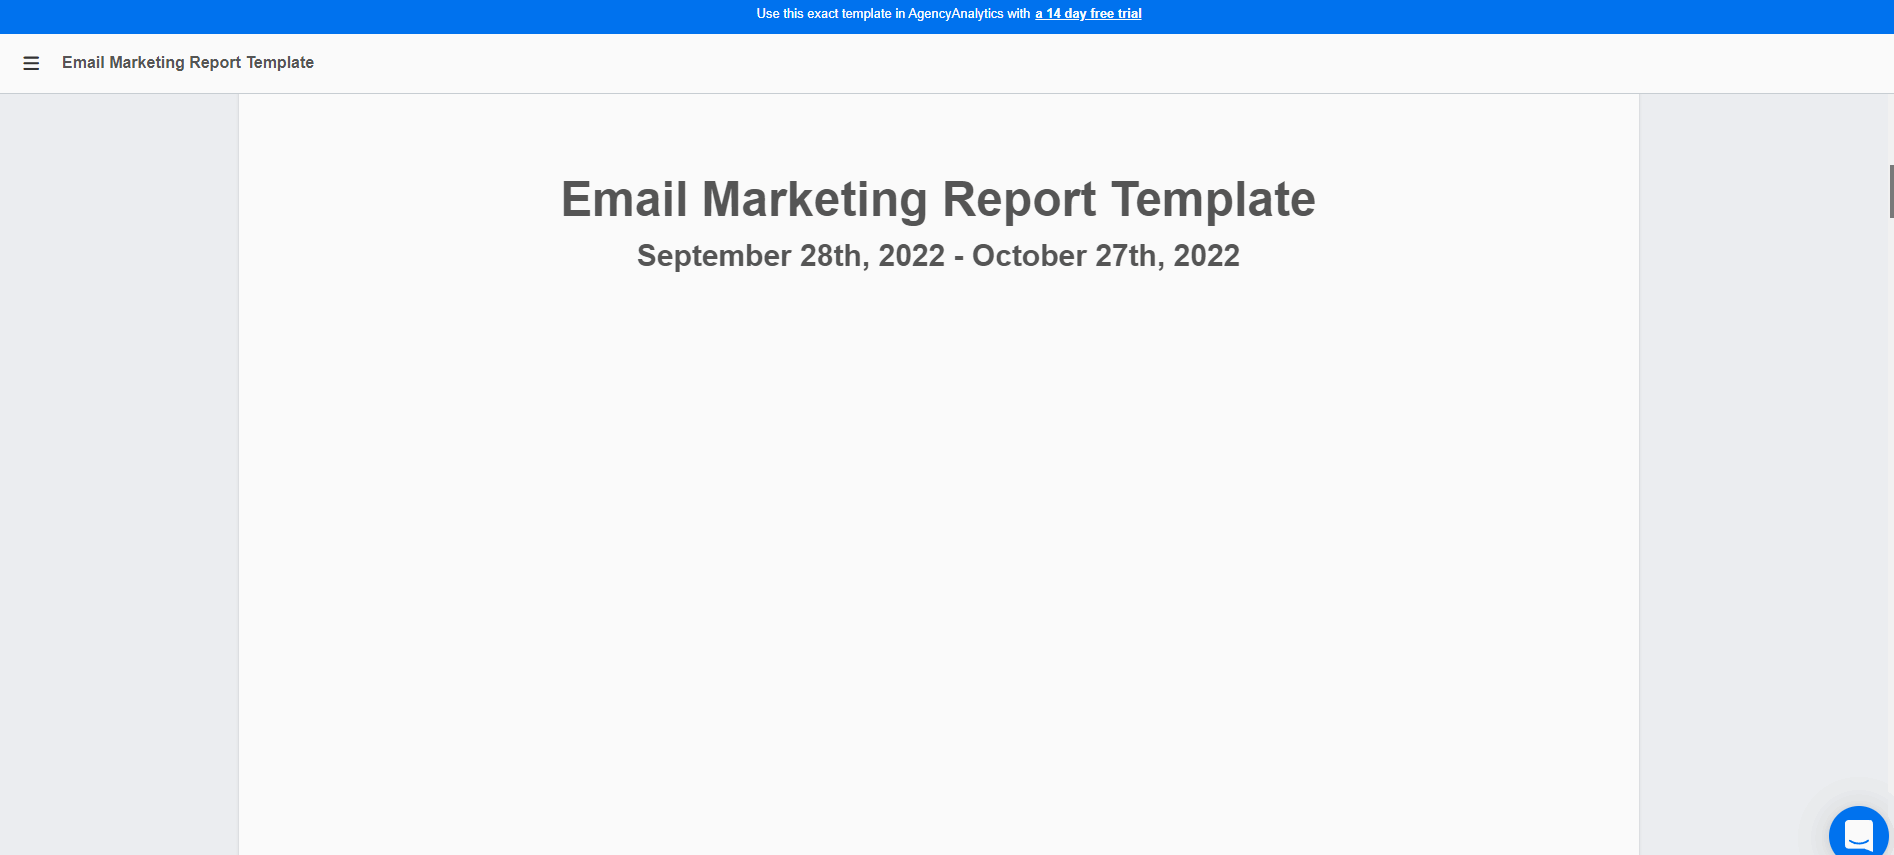 AgencyAnalytics Email Marketing Template Example